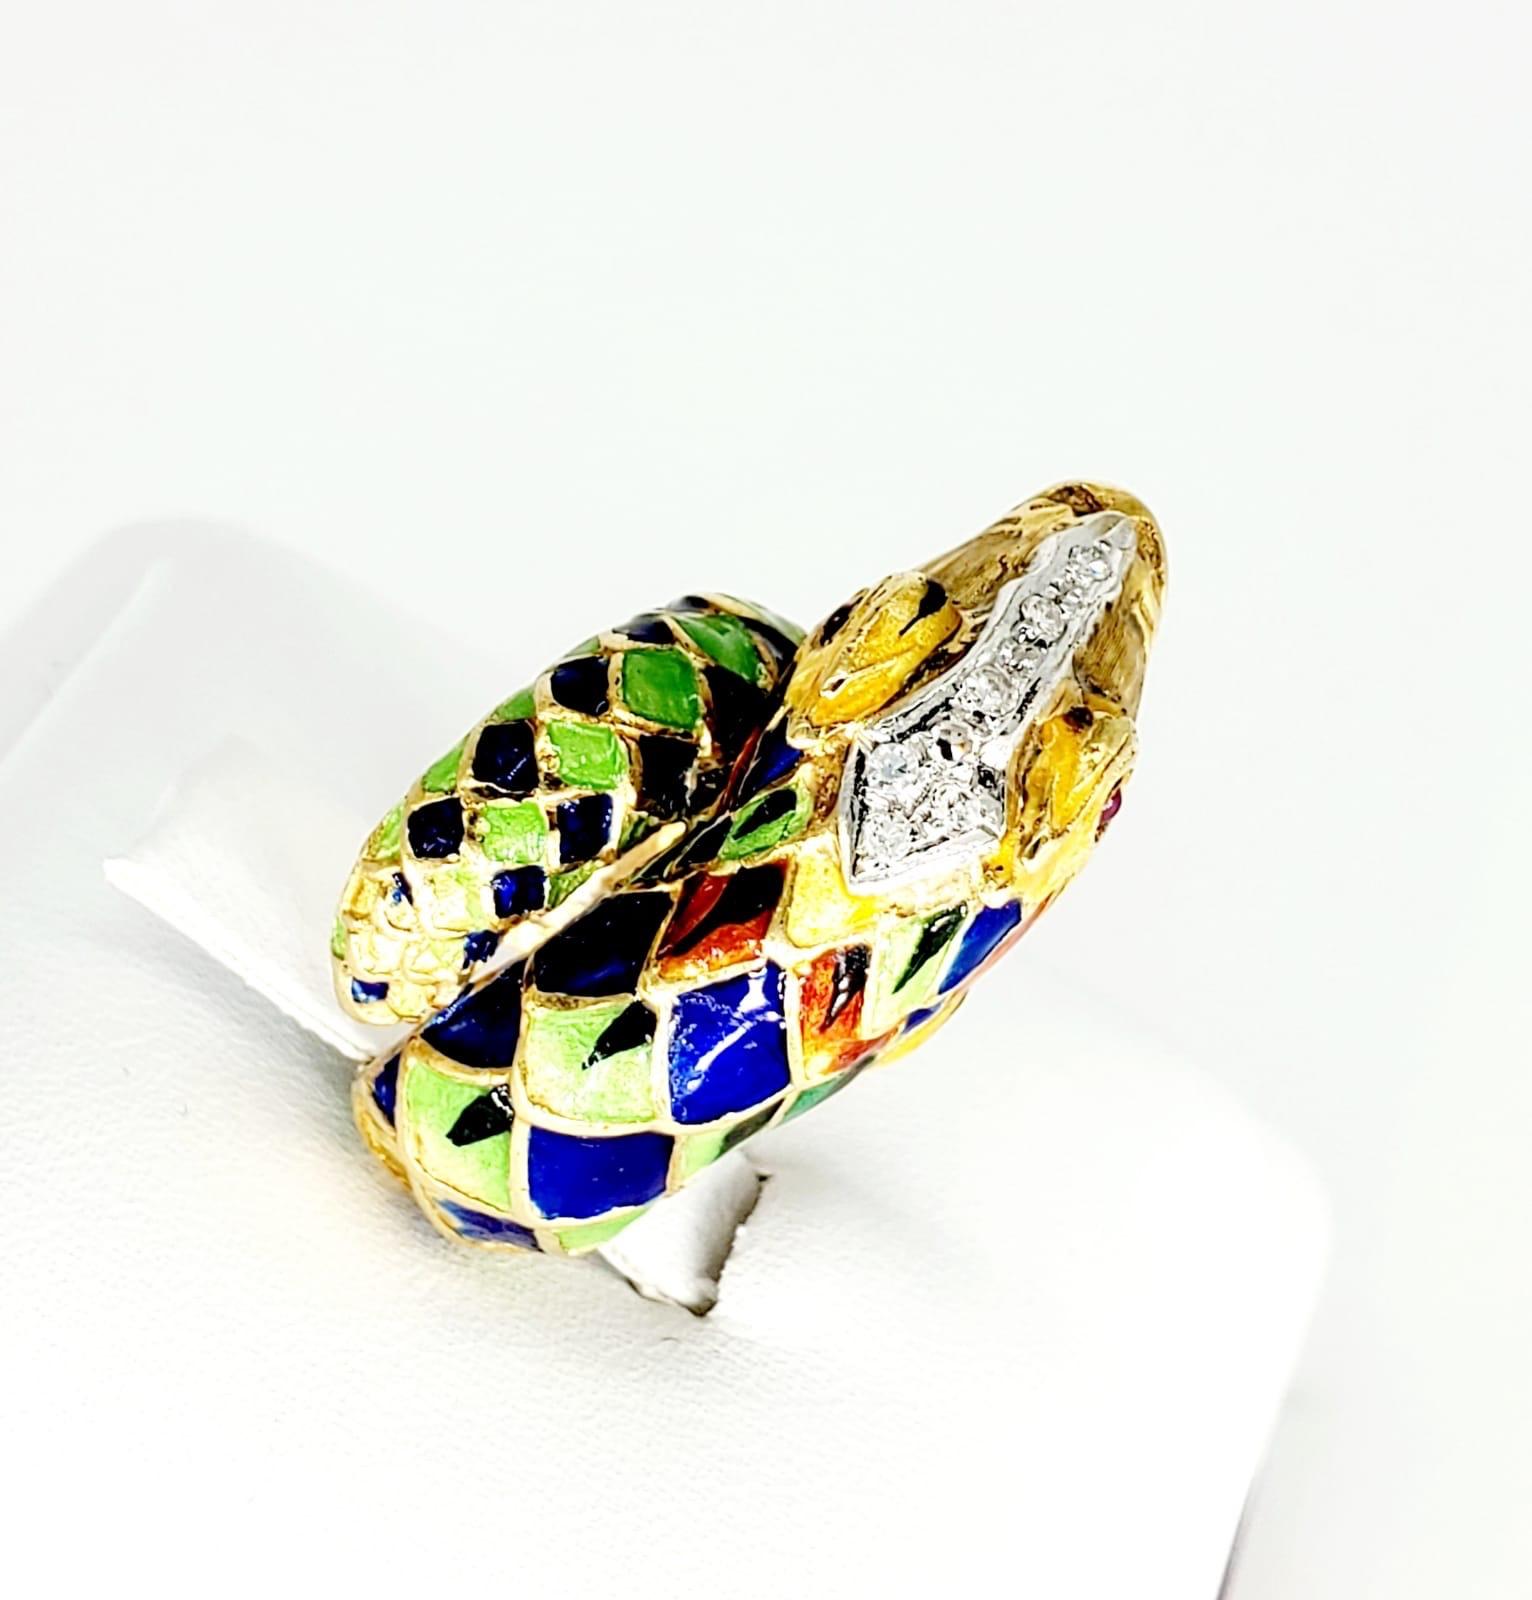 Vintage Enamelled Old Mine Cut Diamonds Snake Ring. The ring features red ruby cabochon eyes as well as approx 0.10 carats of old minded diamonds on the head of the snake. The ring is made of 18k solid yellow good with beautiful enamel around the